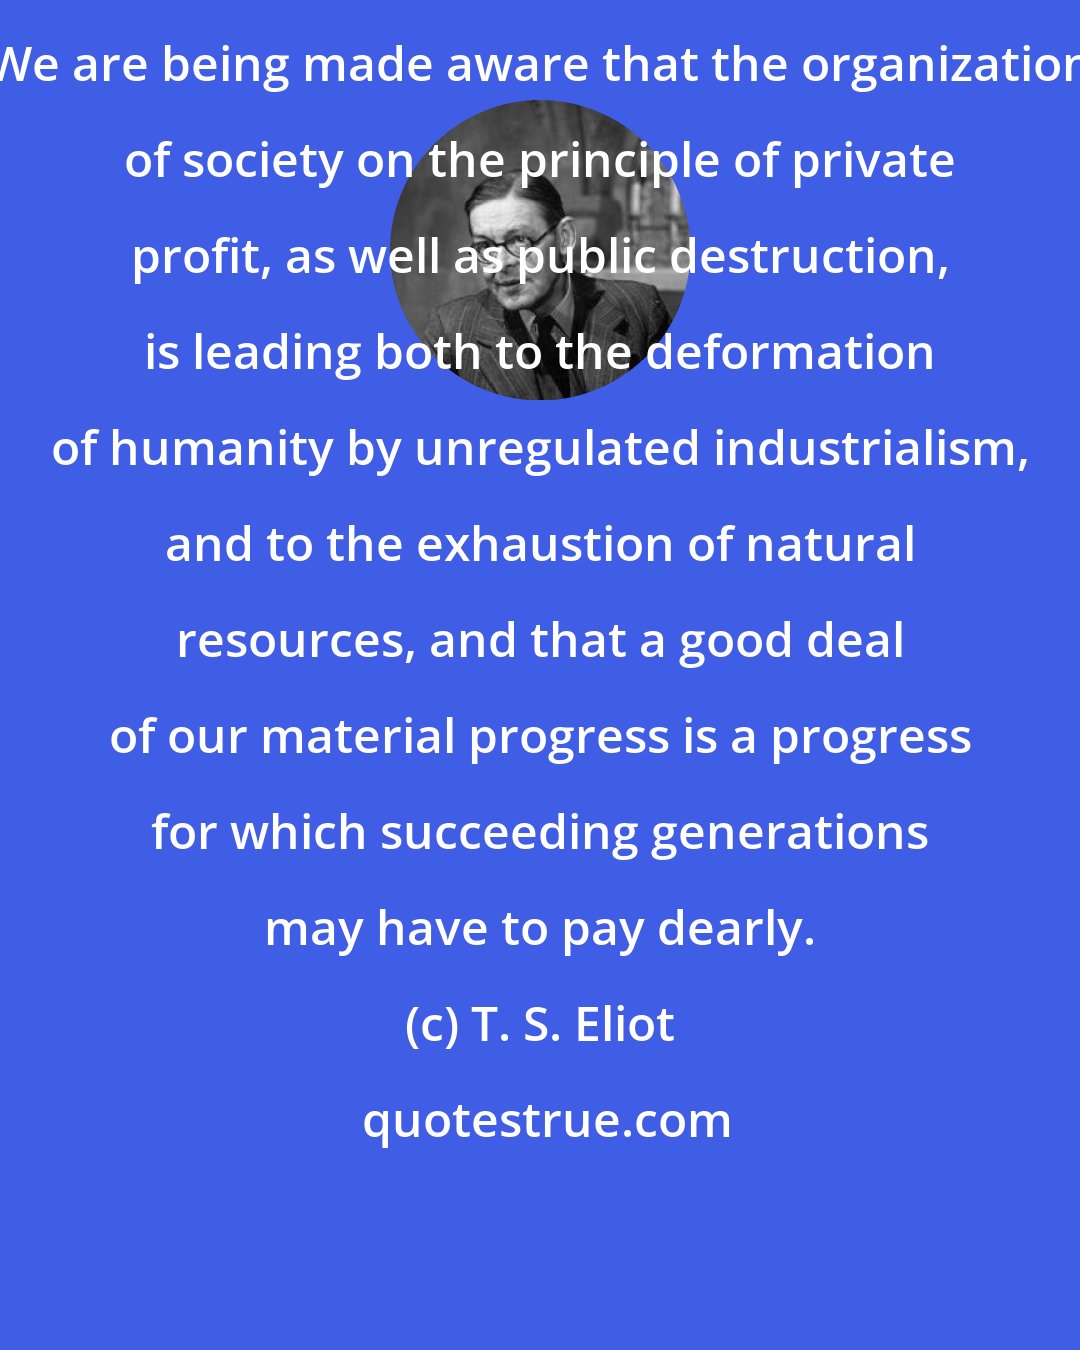 T. S. Eliot: We are being made aware that the organization of society on the principle of private profit, as well as public destruction, is leading both to the deformation of humanity by unregulated industrialism, and to the exhaustion of natural resources, and that a good deal of our material progress is a progress for which succeeding generations may have to pay dearly.